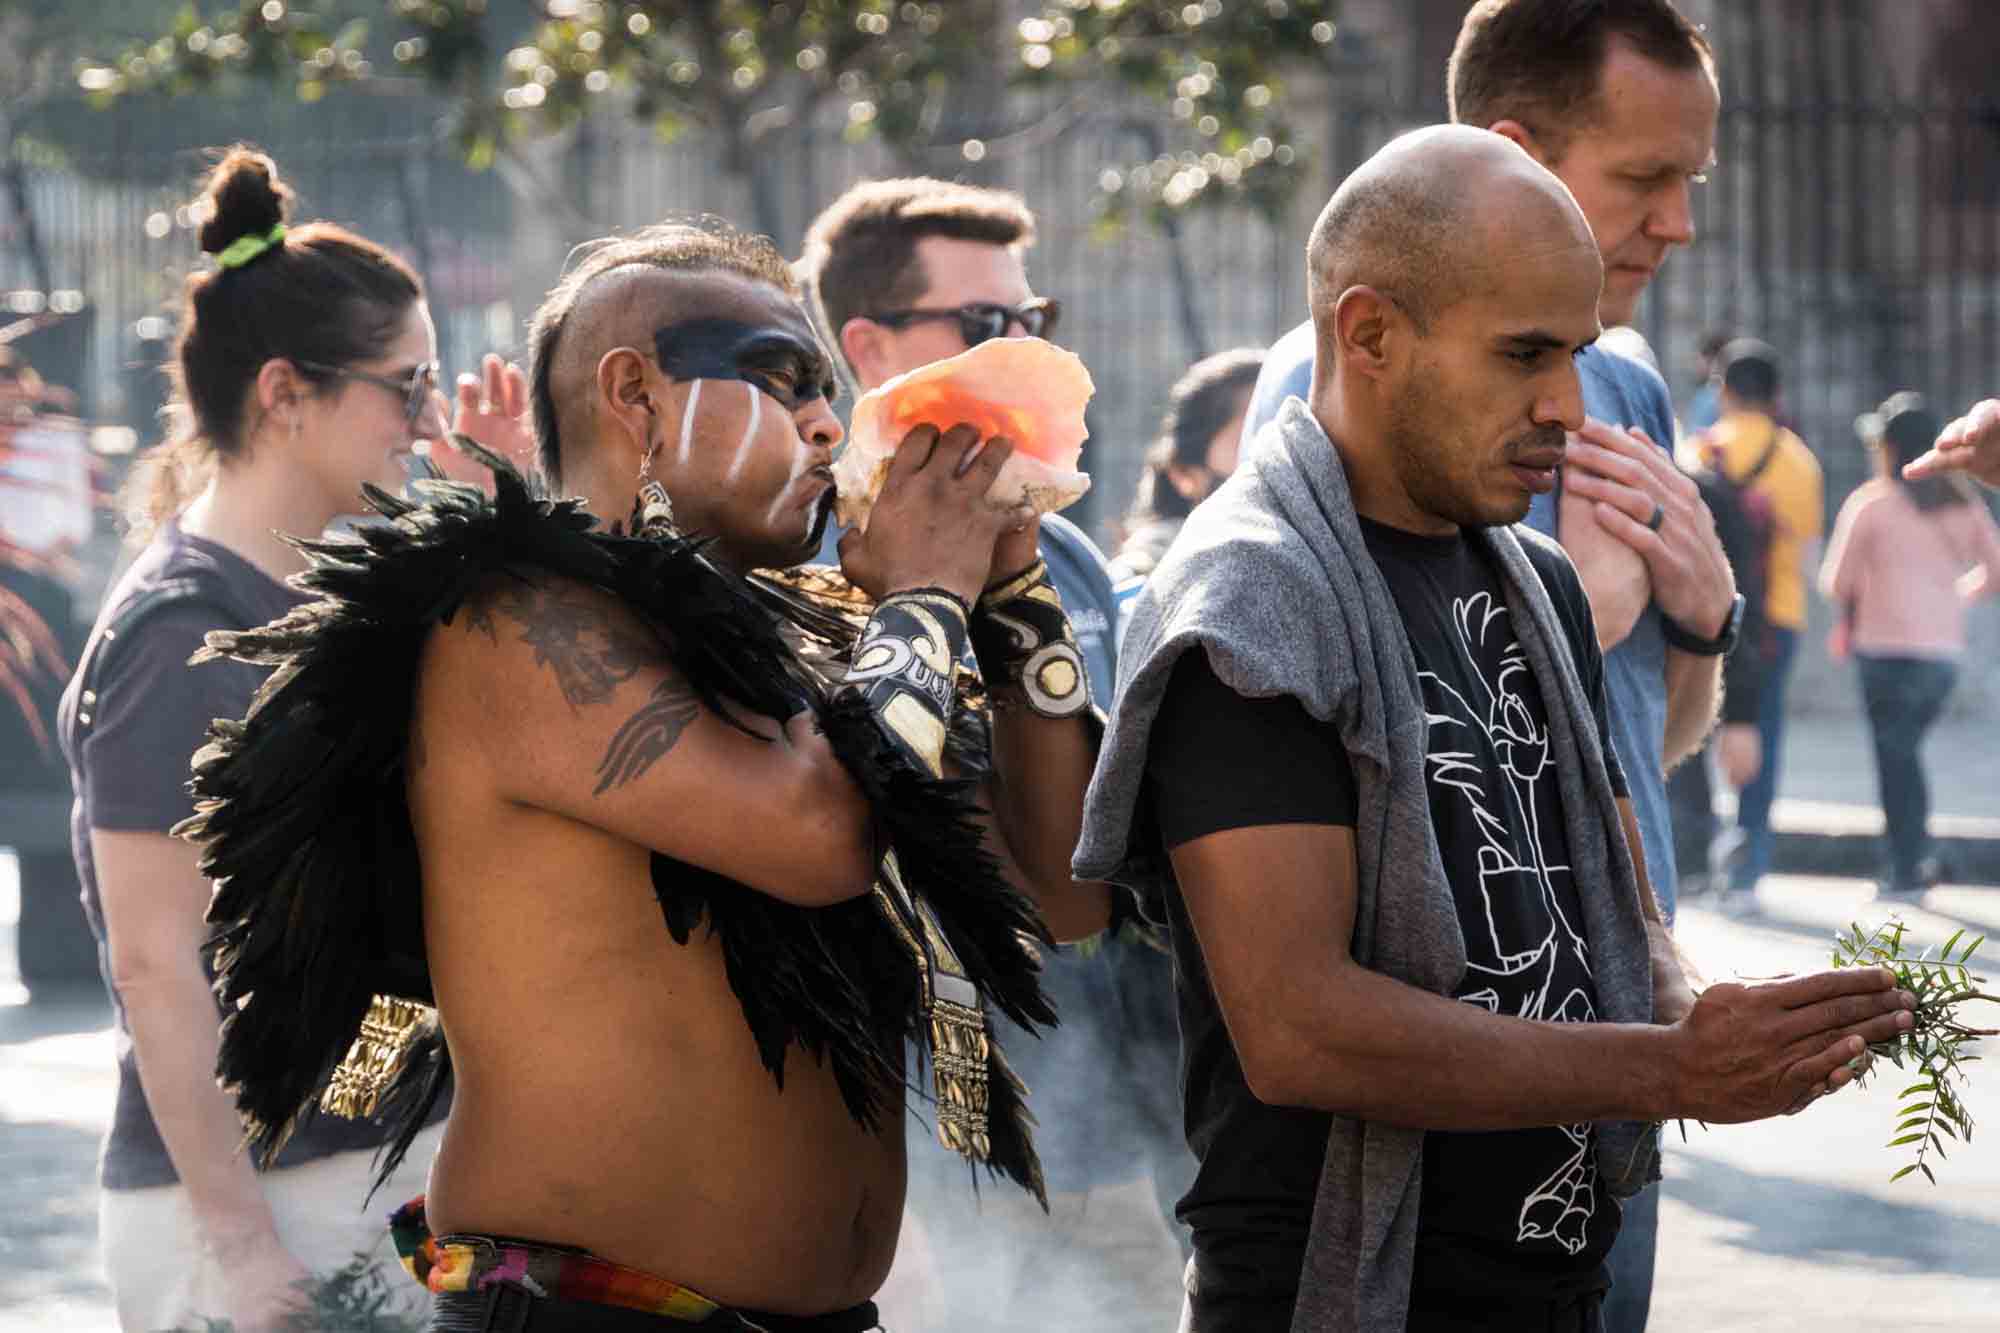 An indigenous man blows a shell behind another man in a Mexico City ceremony